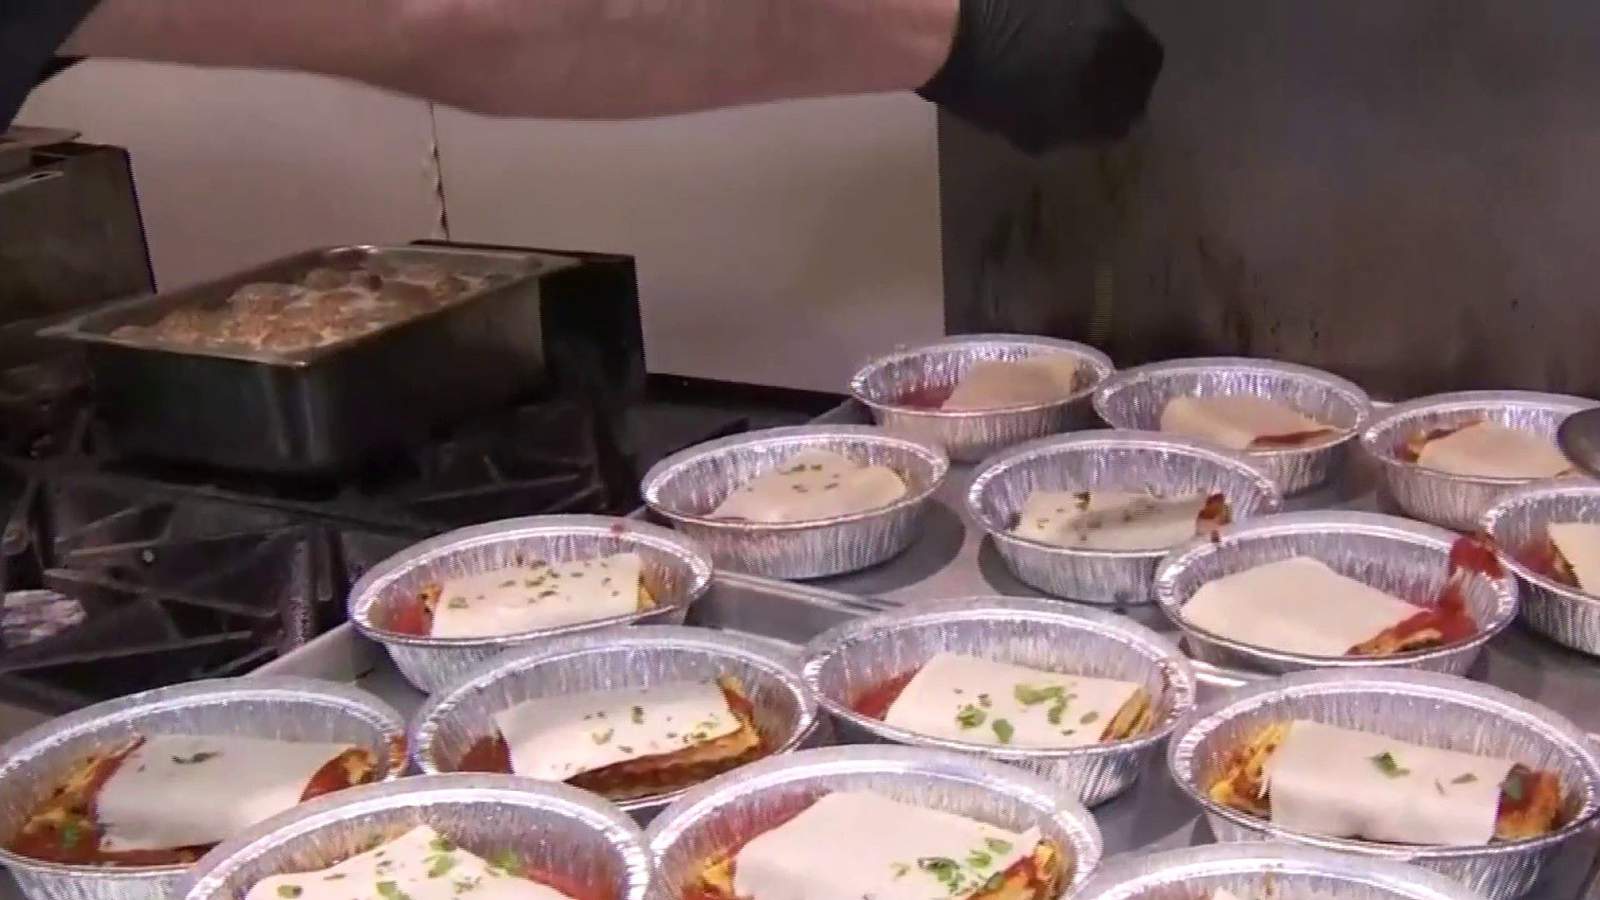 Roanoke police eat homemade Italian from Sal’s thanks to Food for Frontline